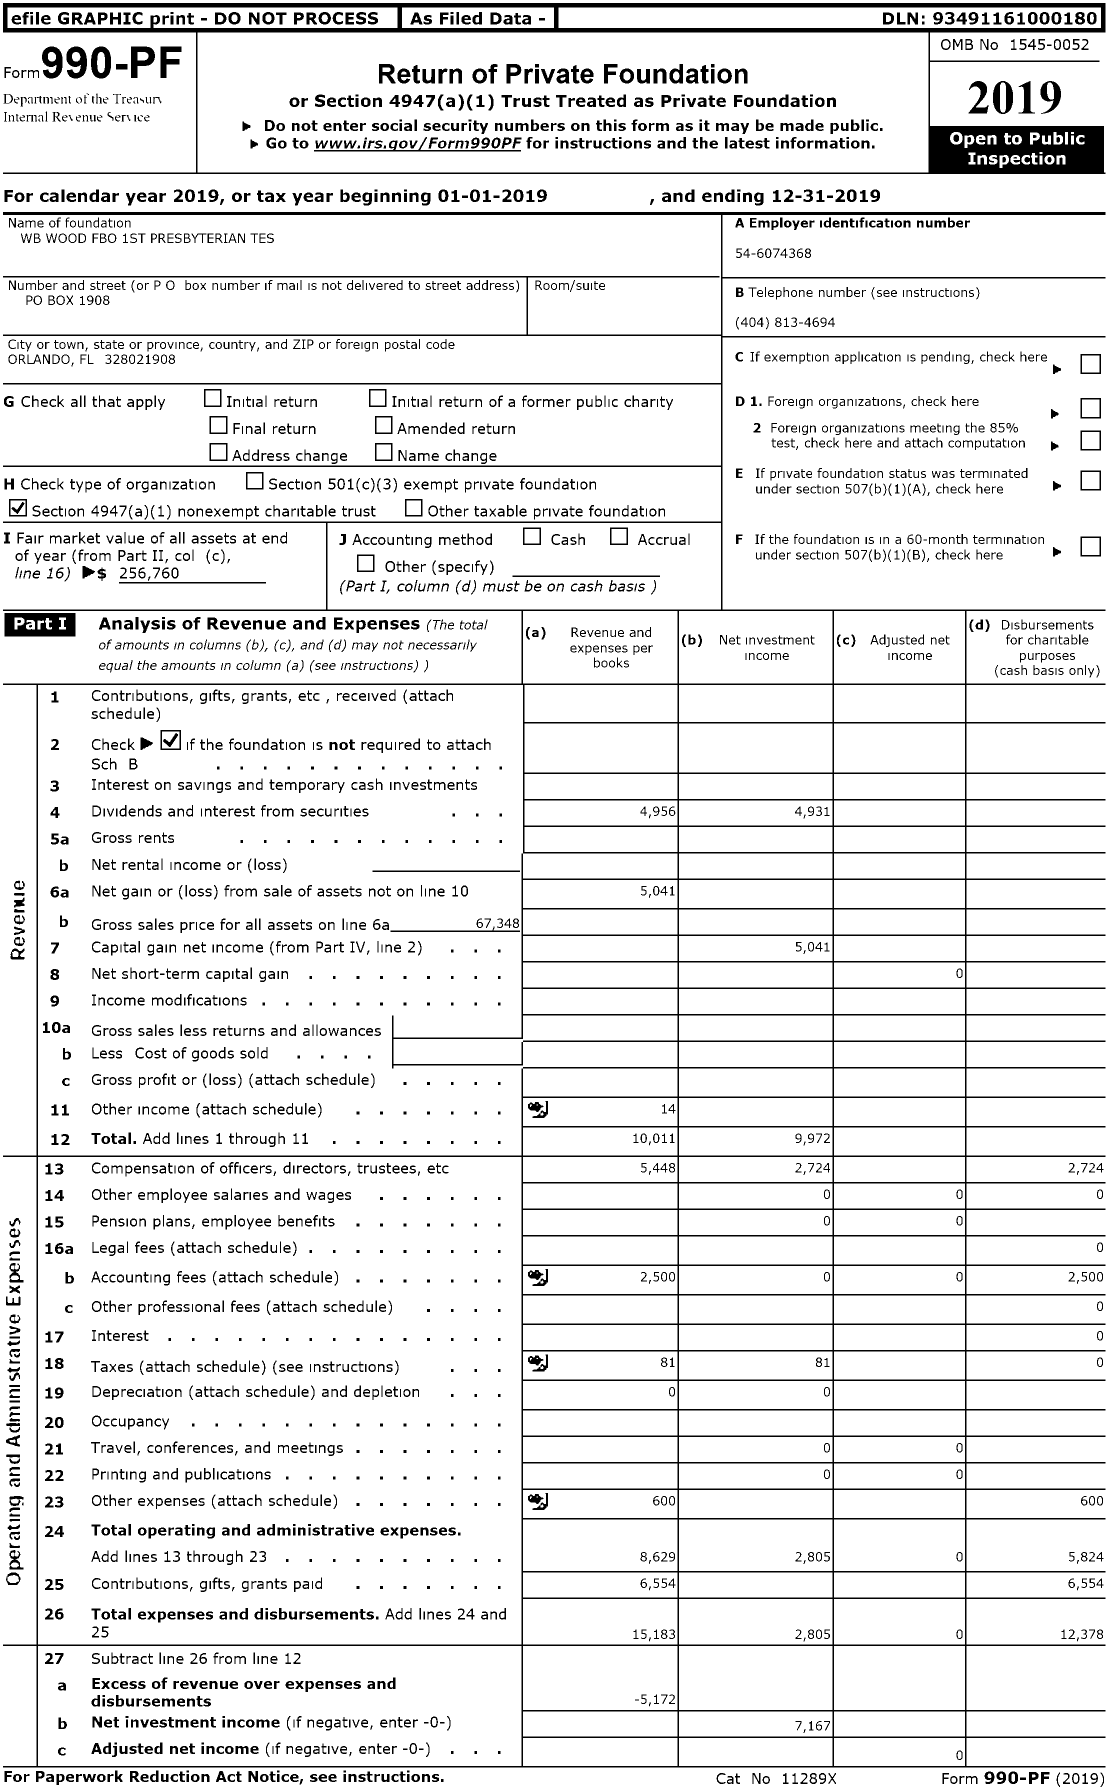 Image of first page of 2019 Form 990PR for WB B Wood Fbo First Presby Tes Trust